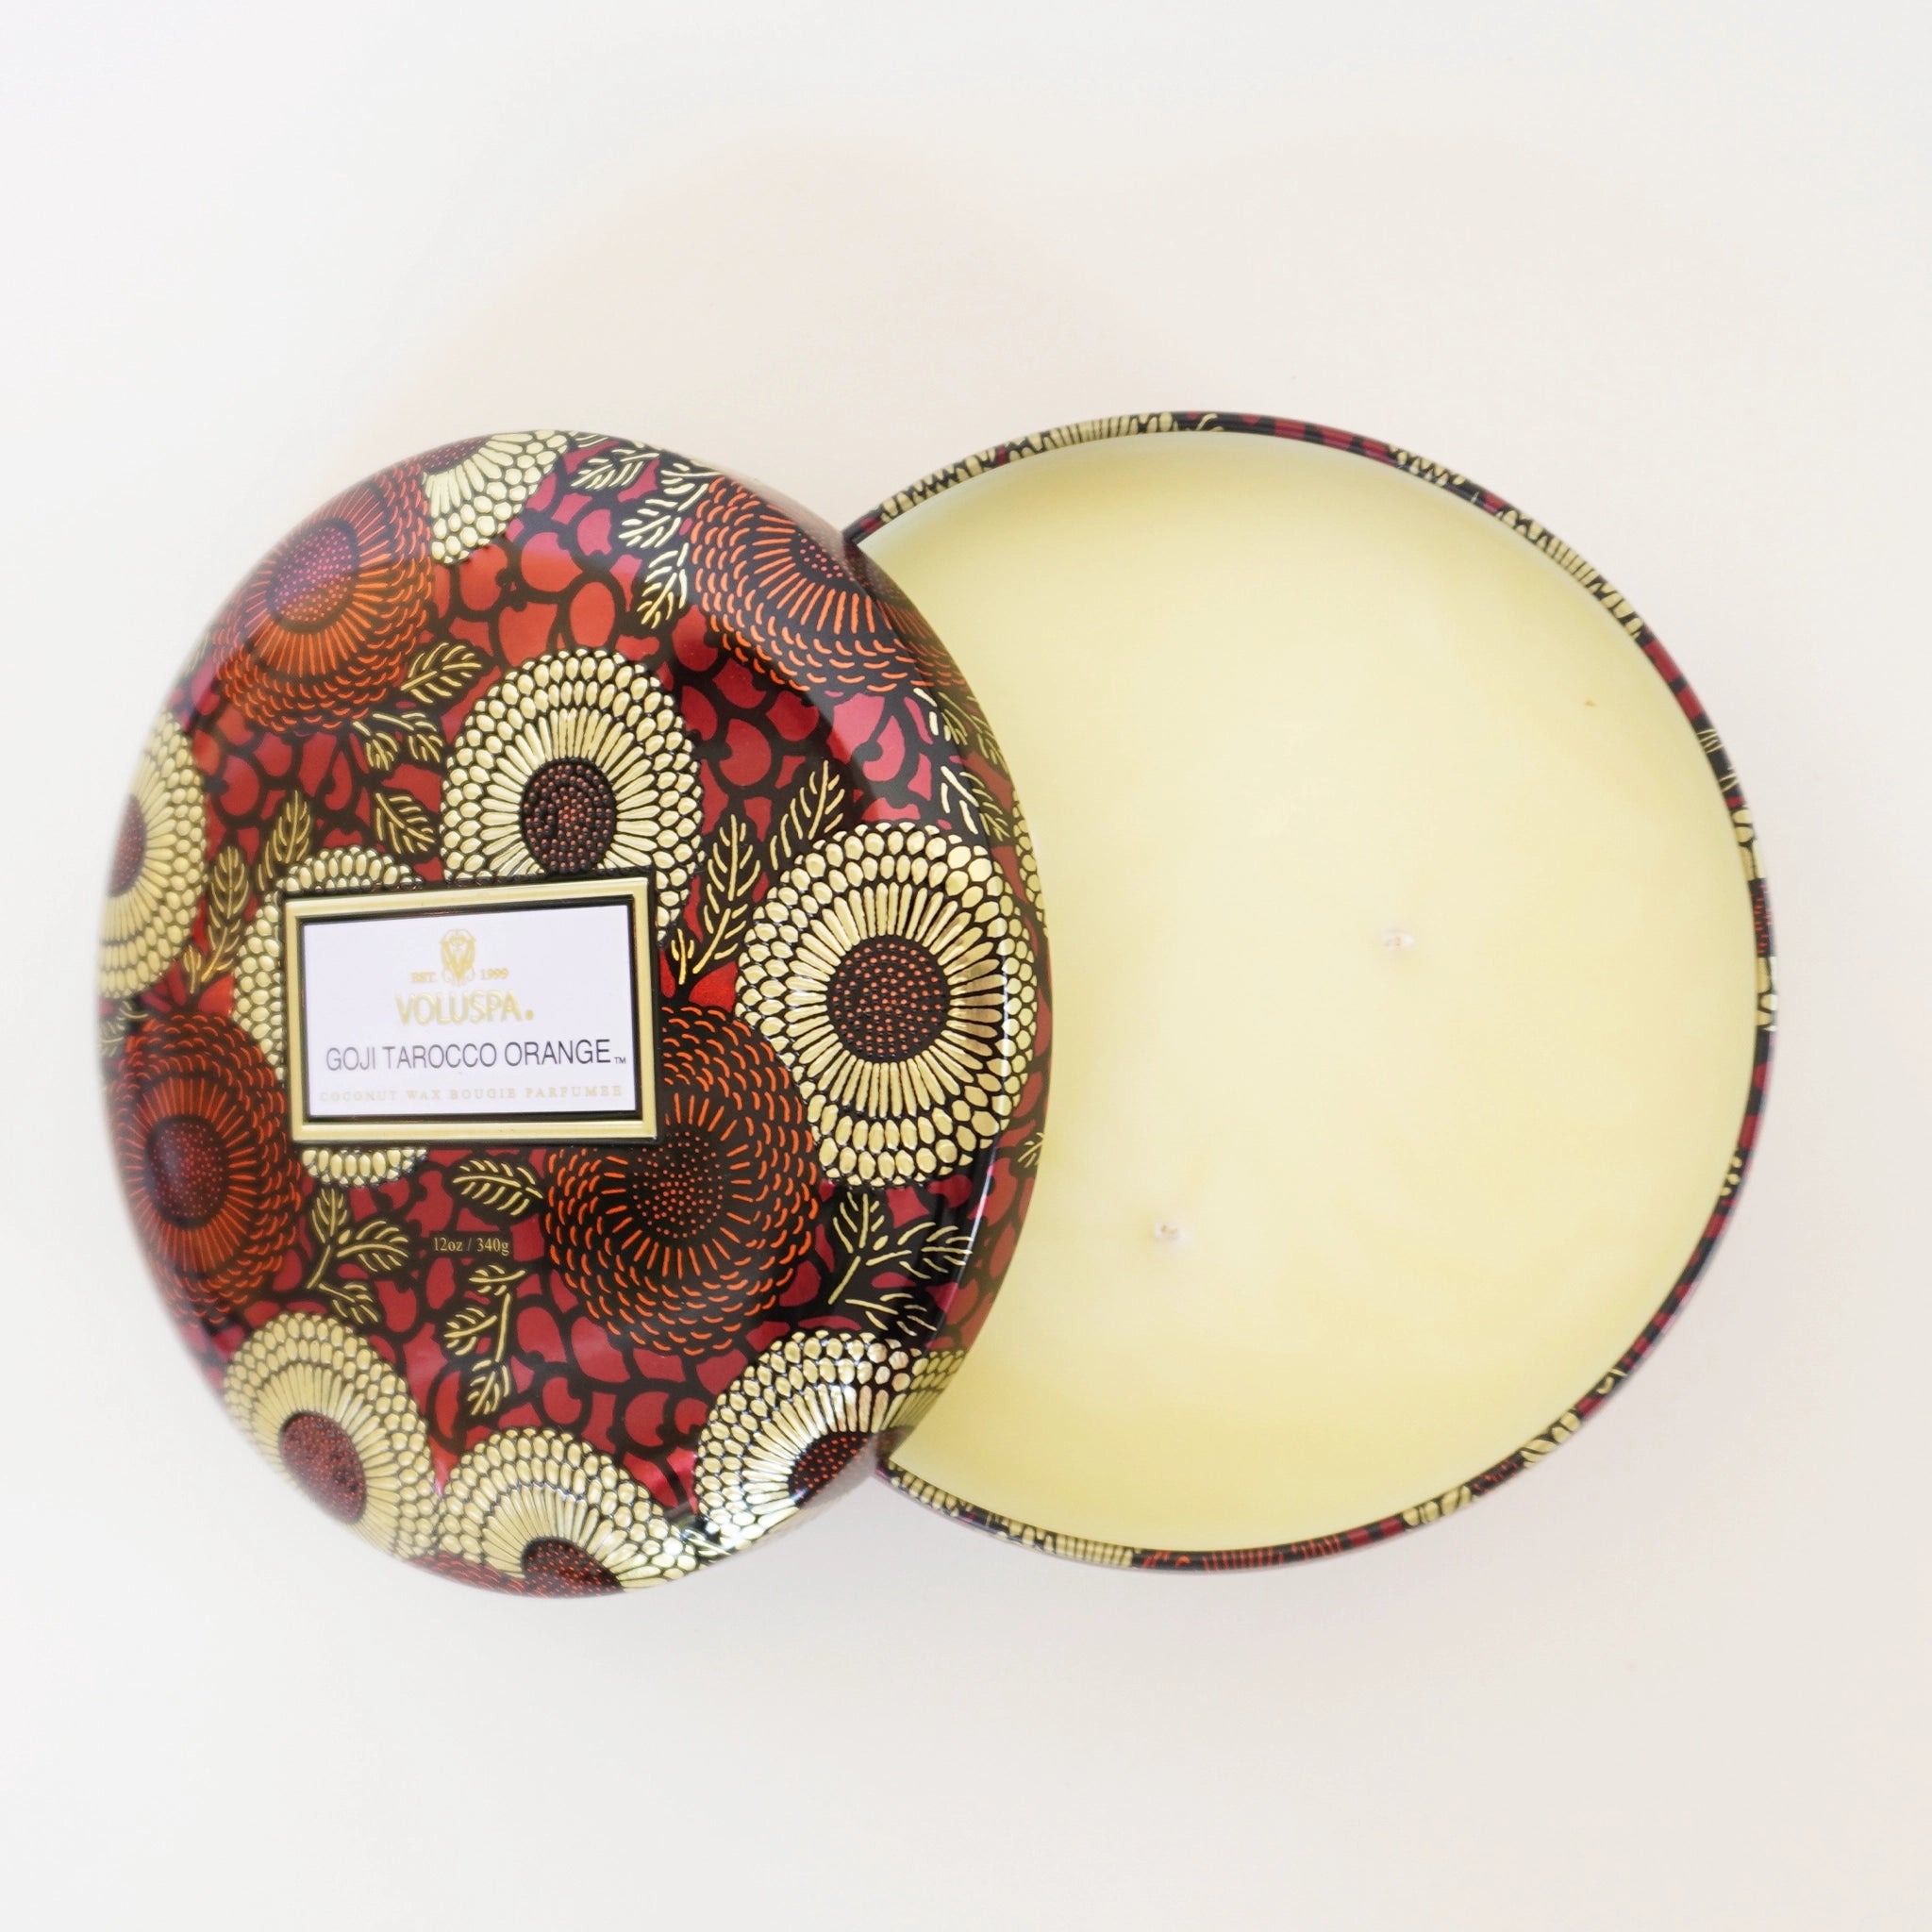 On a white background is a red tin with a three wick candle inside and a label on the lid that reads, "Voluspa Goji Torocco Orange".